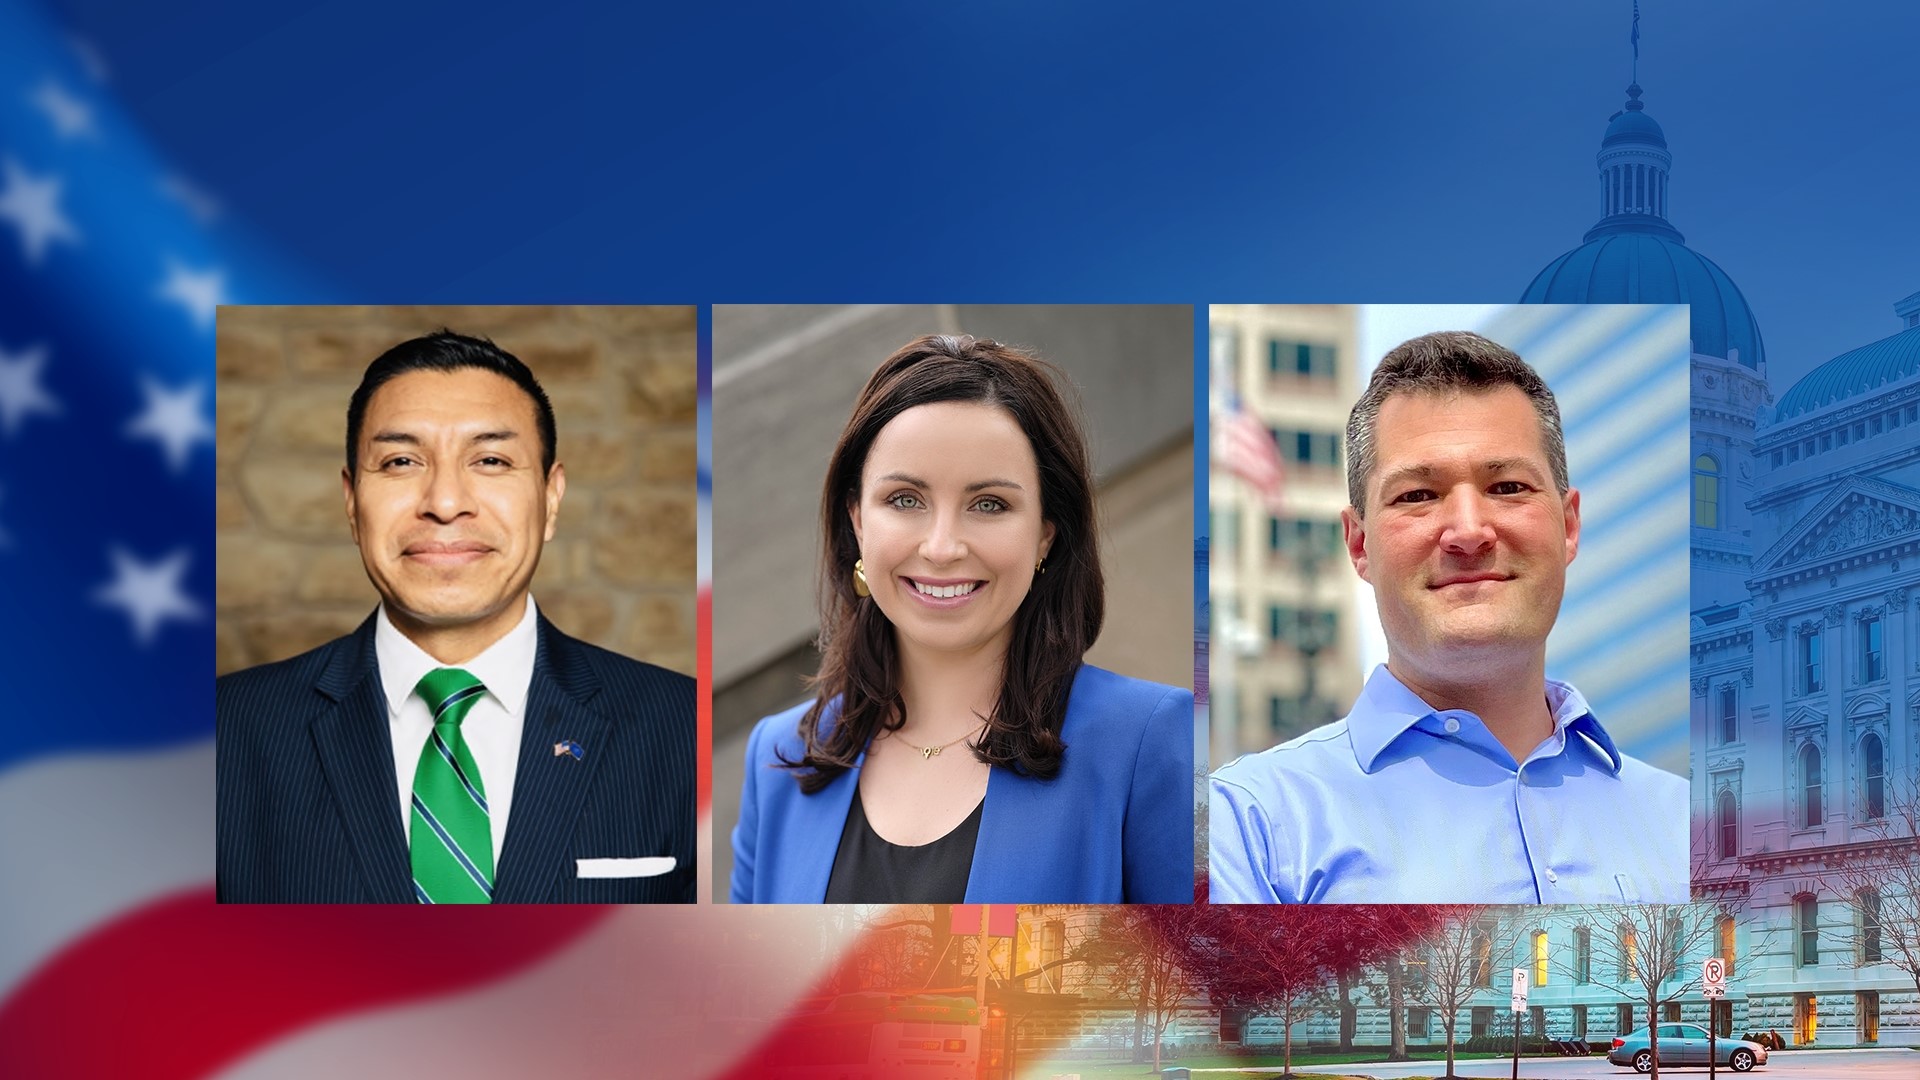 Senior investigative reporter Bob Segall interviewed Democrat Destiny Wells, Republican Diego Morales and Libertarian Jeff Mauer about their priorities.